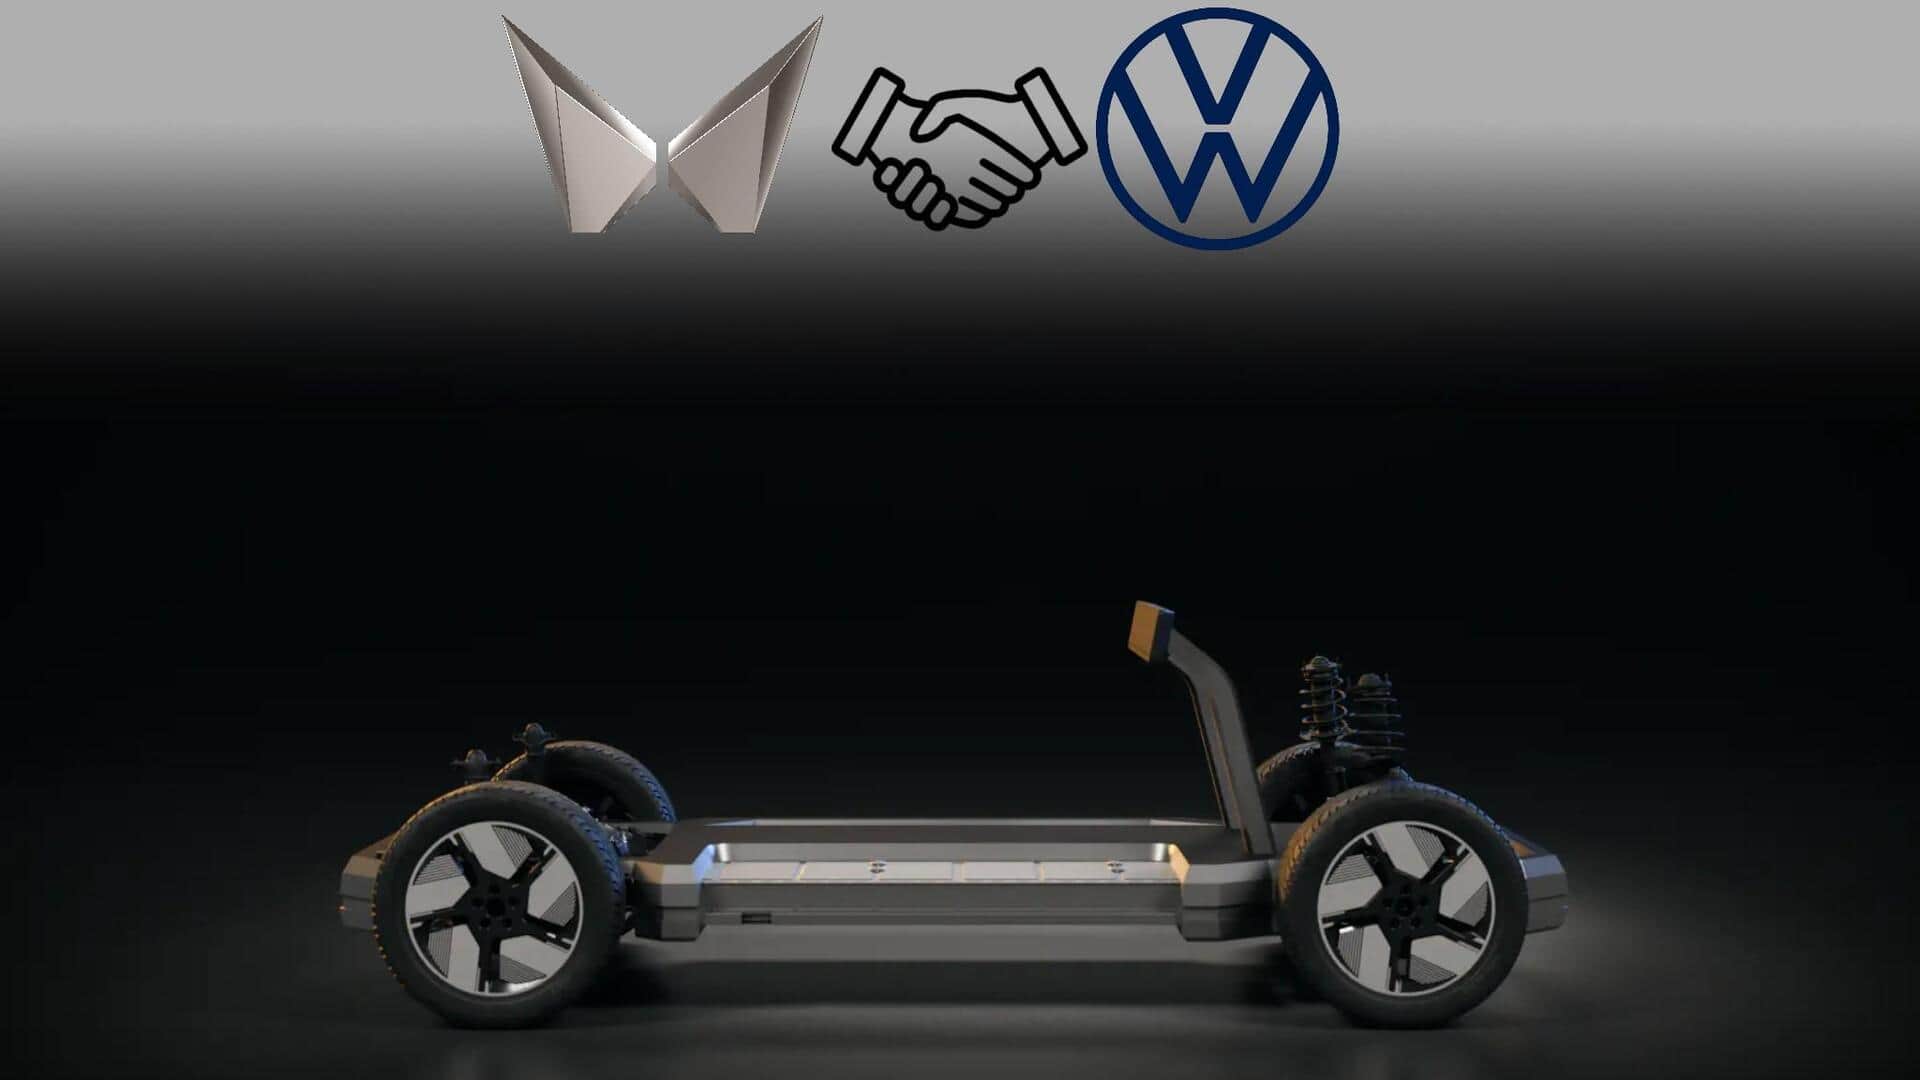 Mahindra's future EVs to use Volkswagen's components